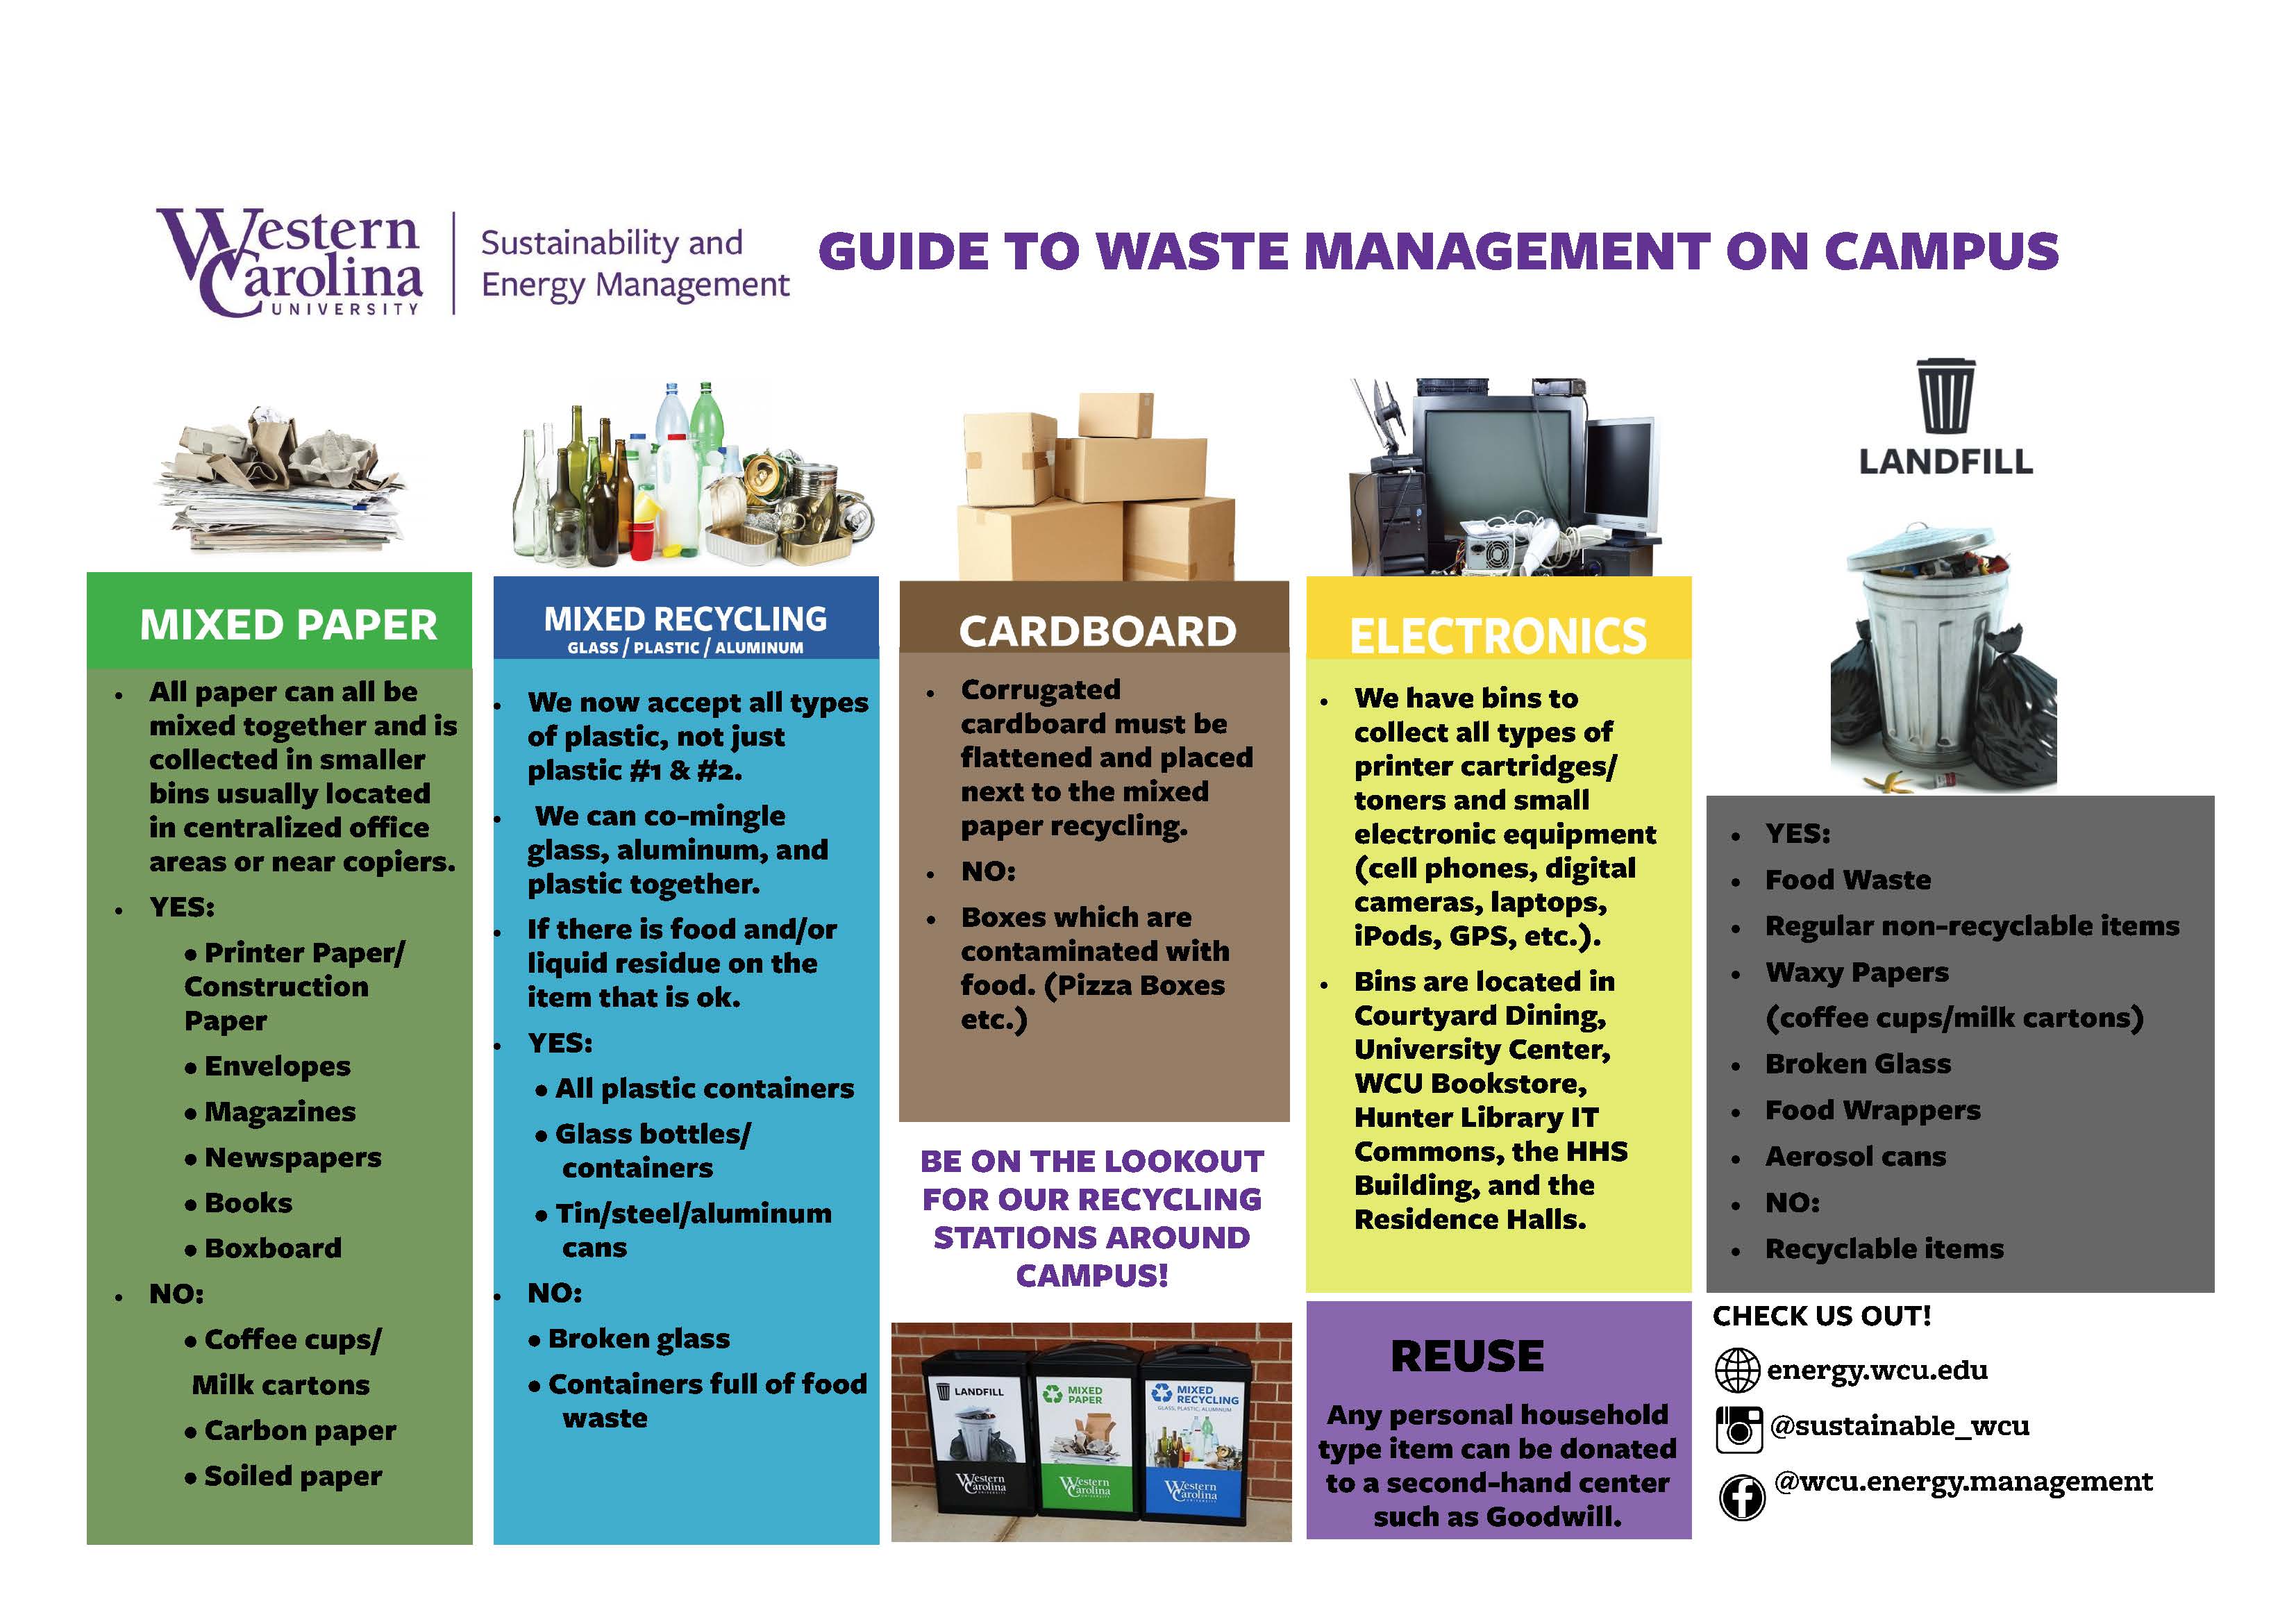 Handout for more Recycling Information